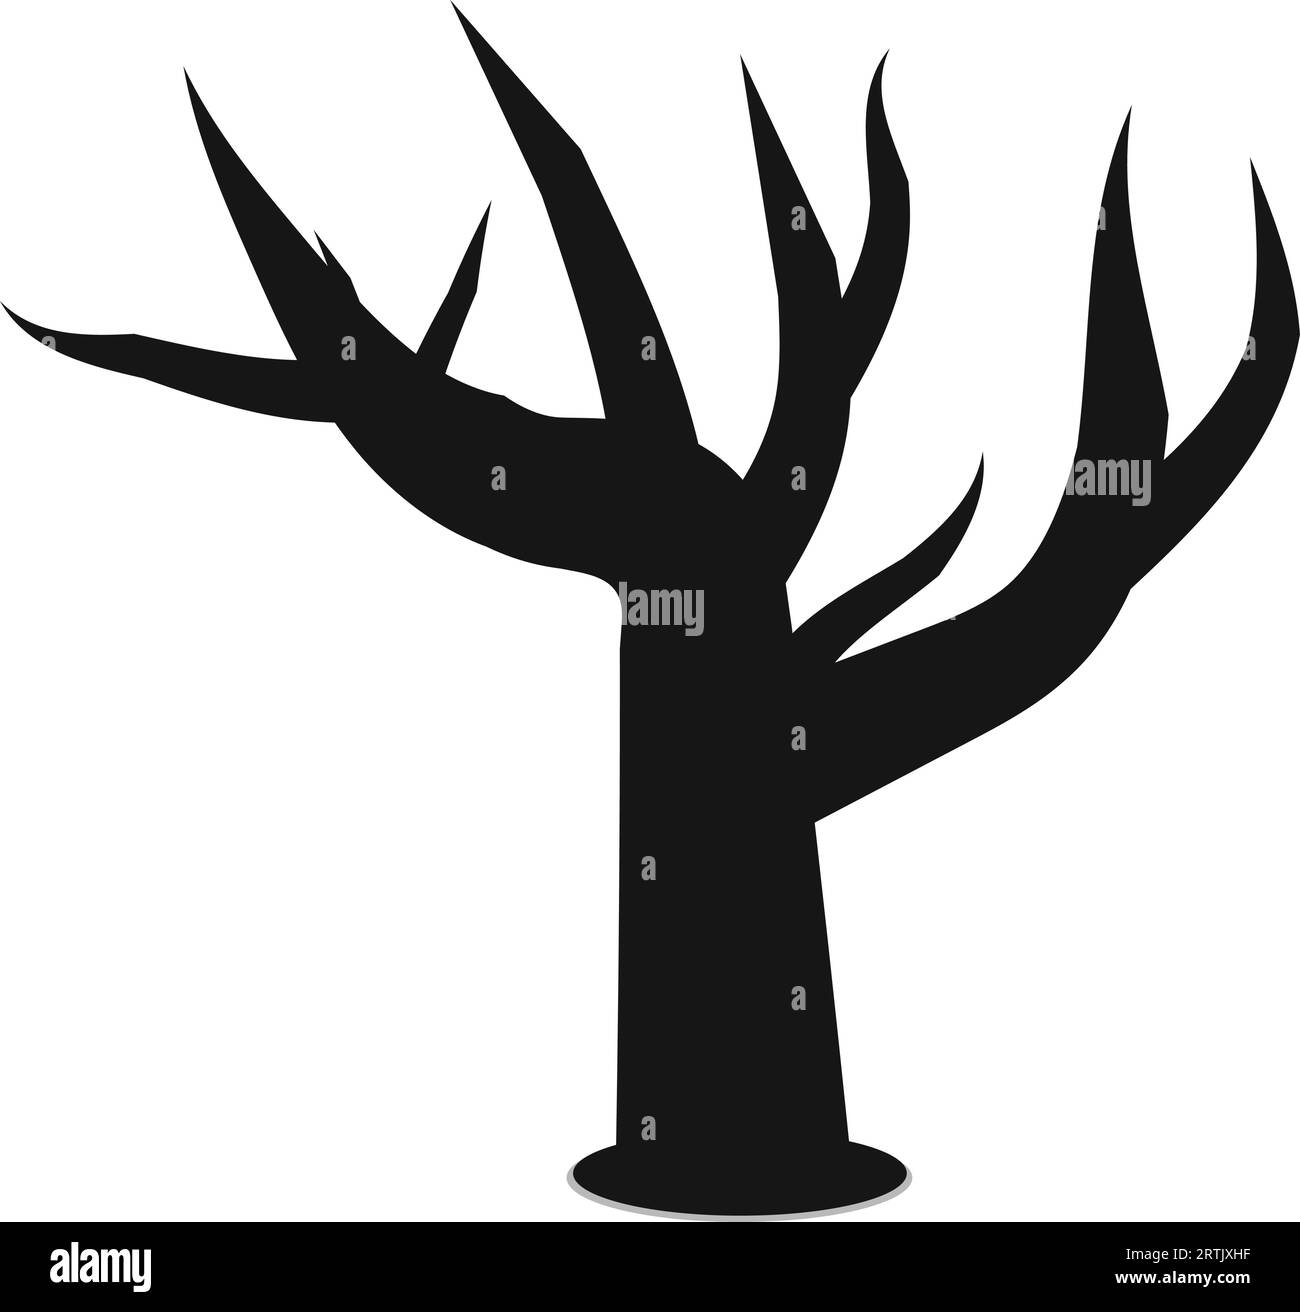 Tree icon with vector halloween black silhouette Stock Vector